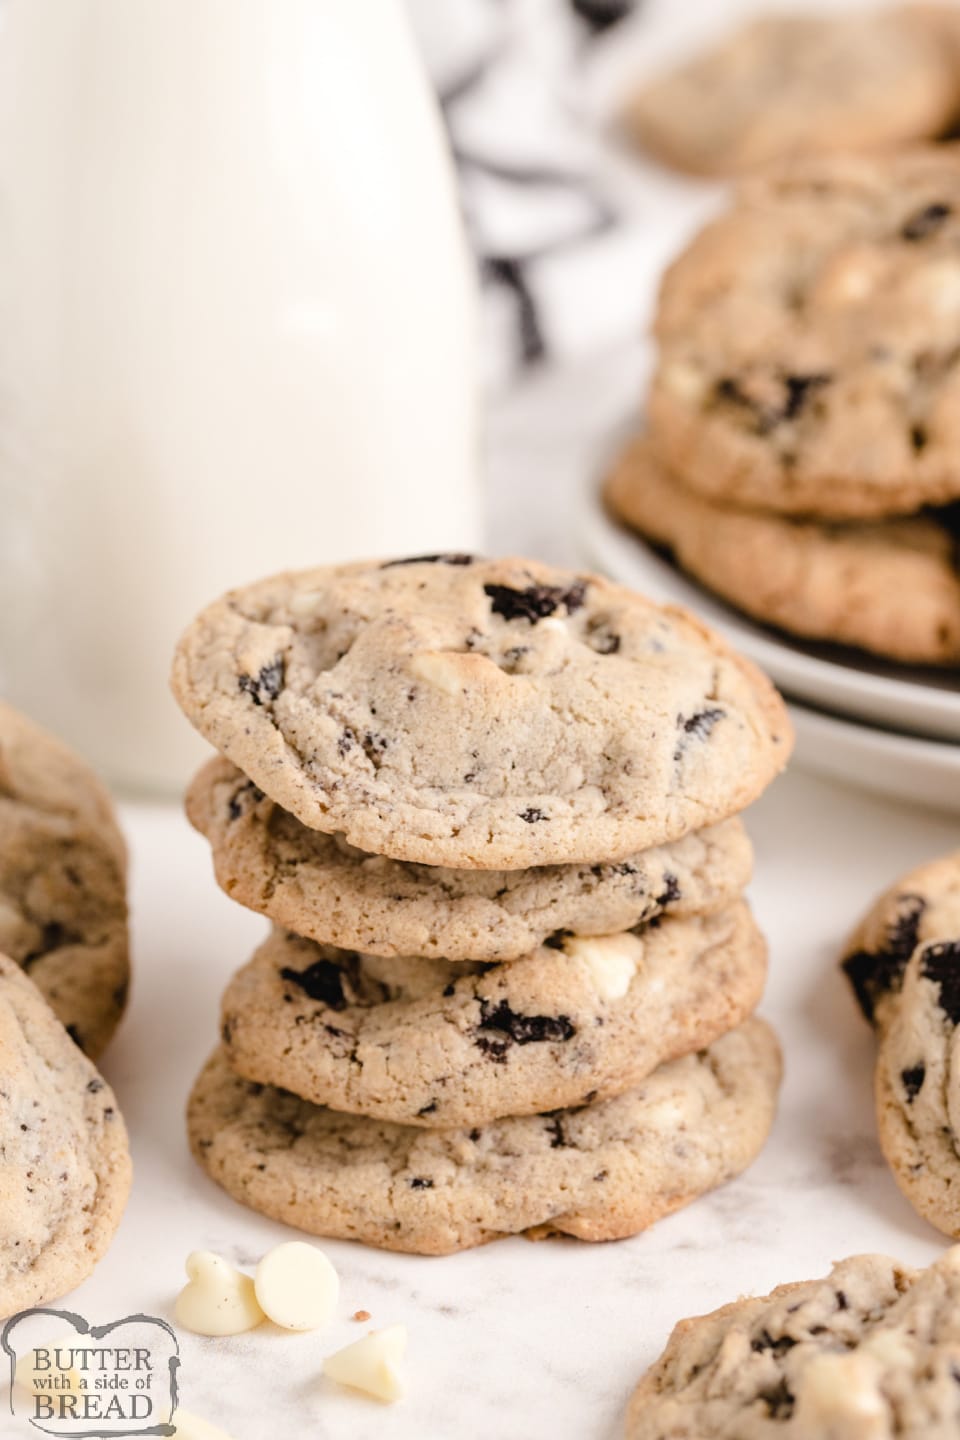 Cookies & Cream Cookies are made with Oreo pudding mix, white chocolate chips and chunks of Oreo cookies. This delicious cookie recipe yields perfectly soft and chewy cookies every time!